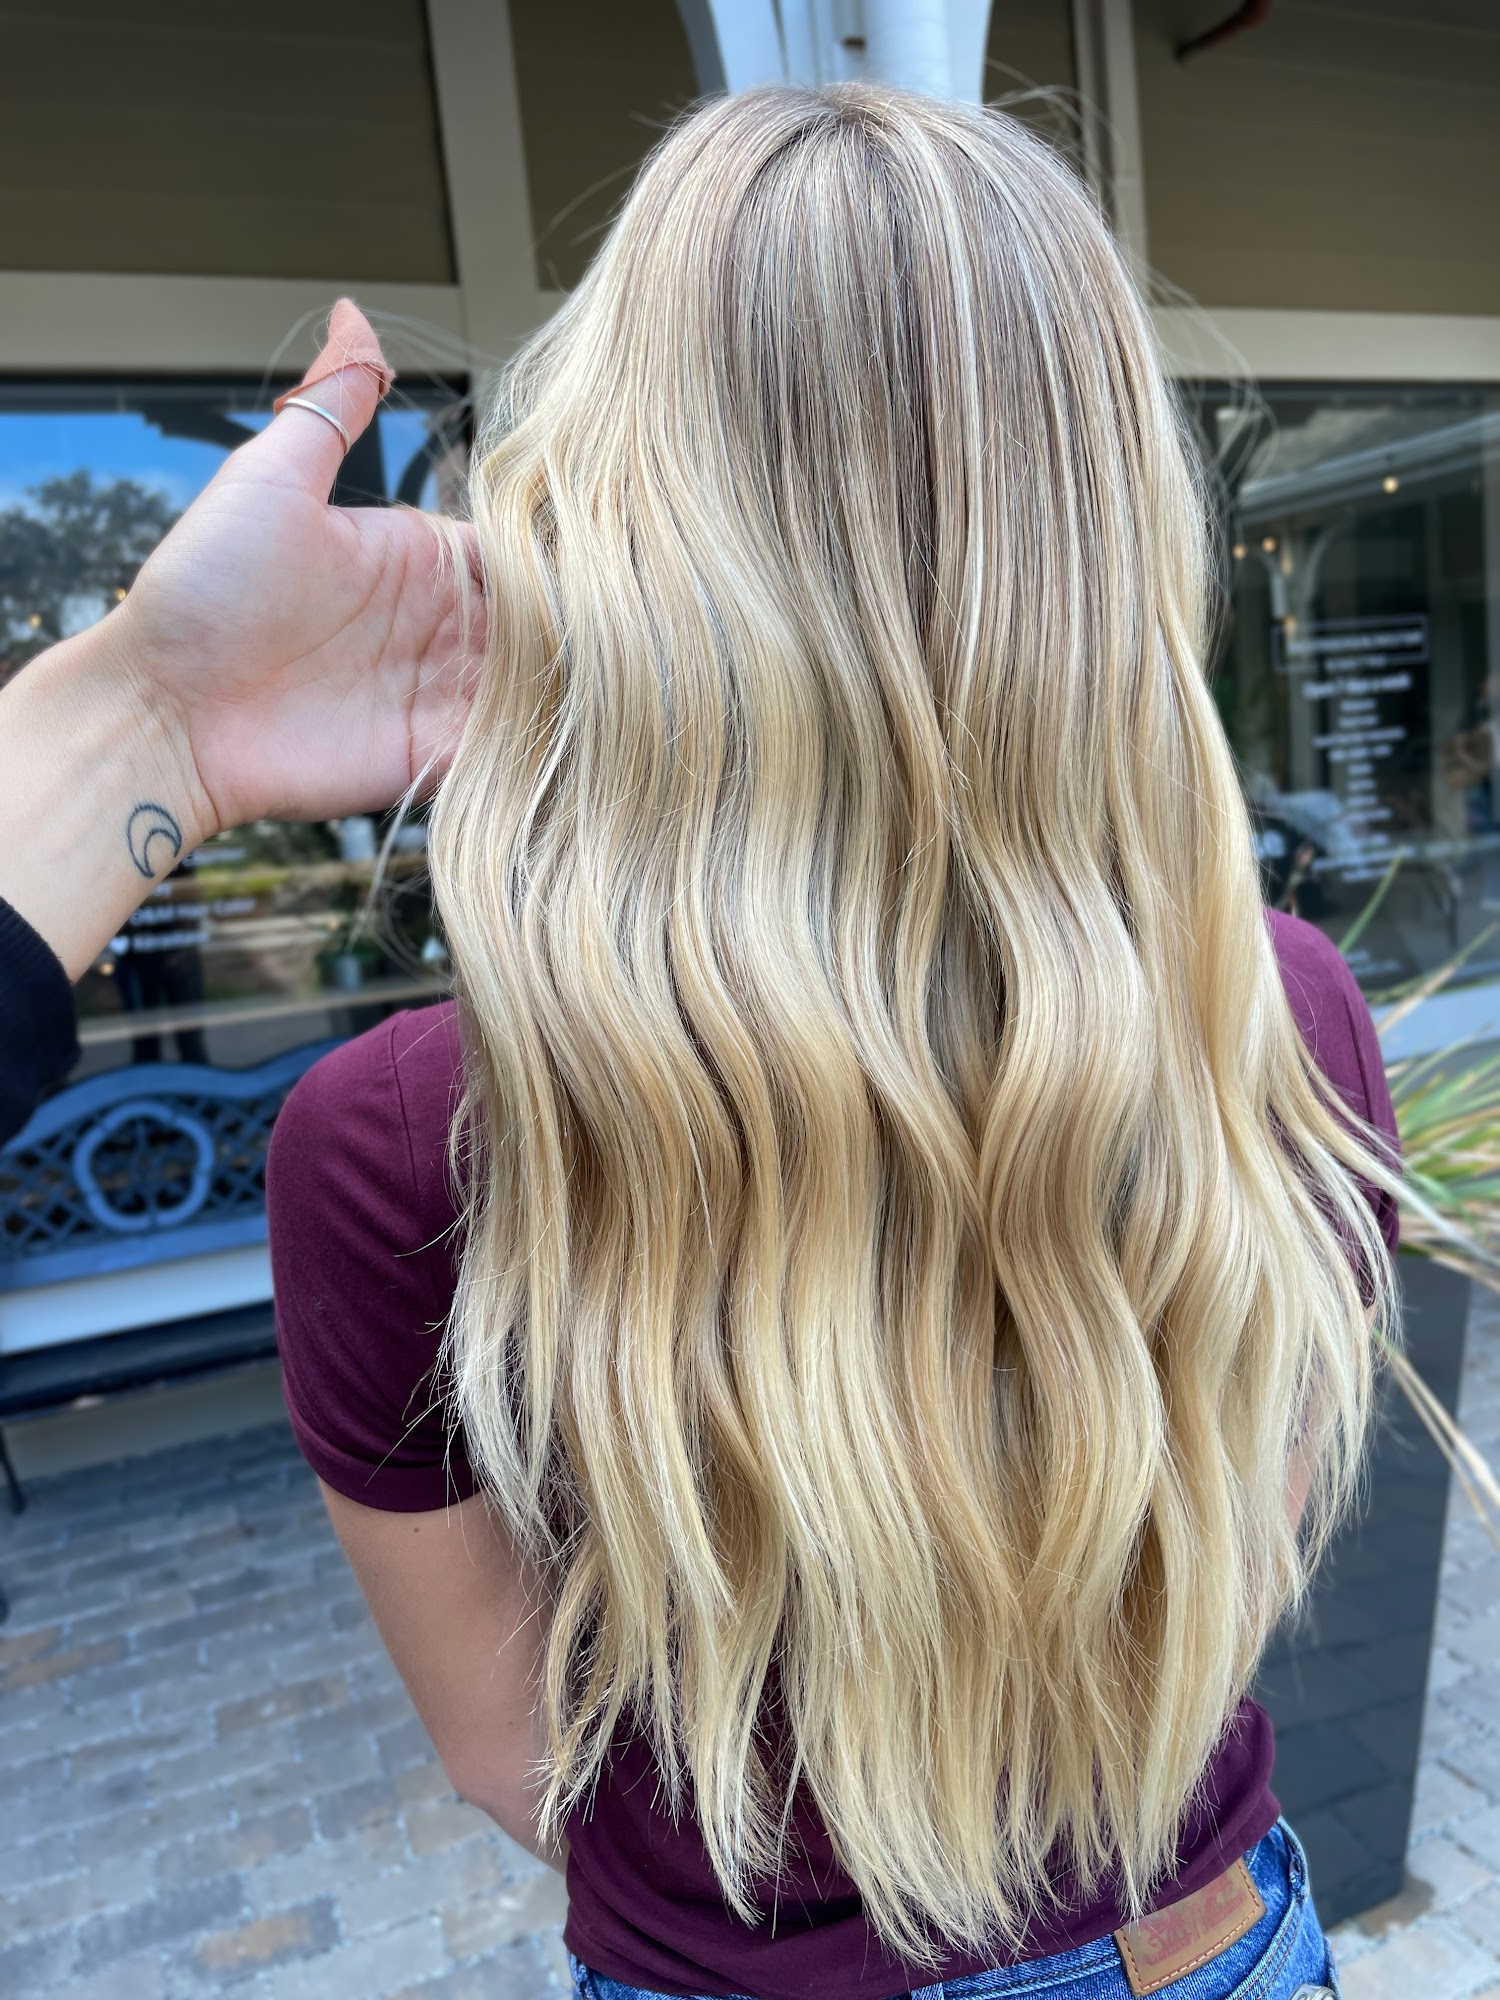 Hair by Sydney Isola 2465 Discovery Bay Blvd, Discovery Bay California 94505